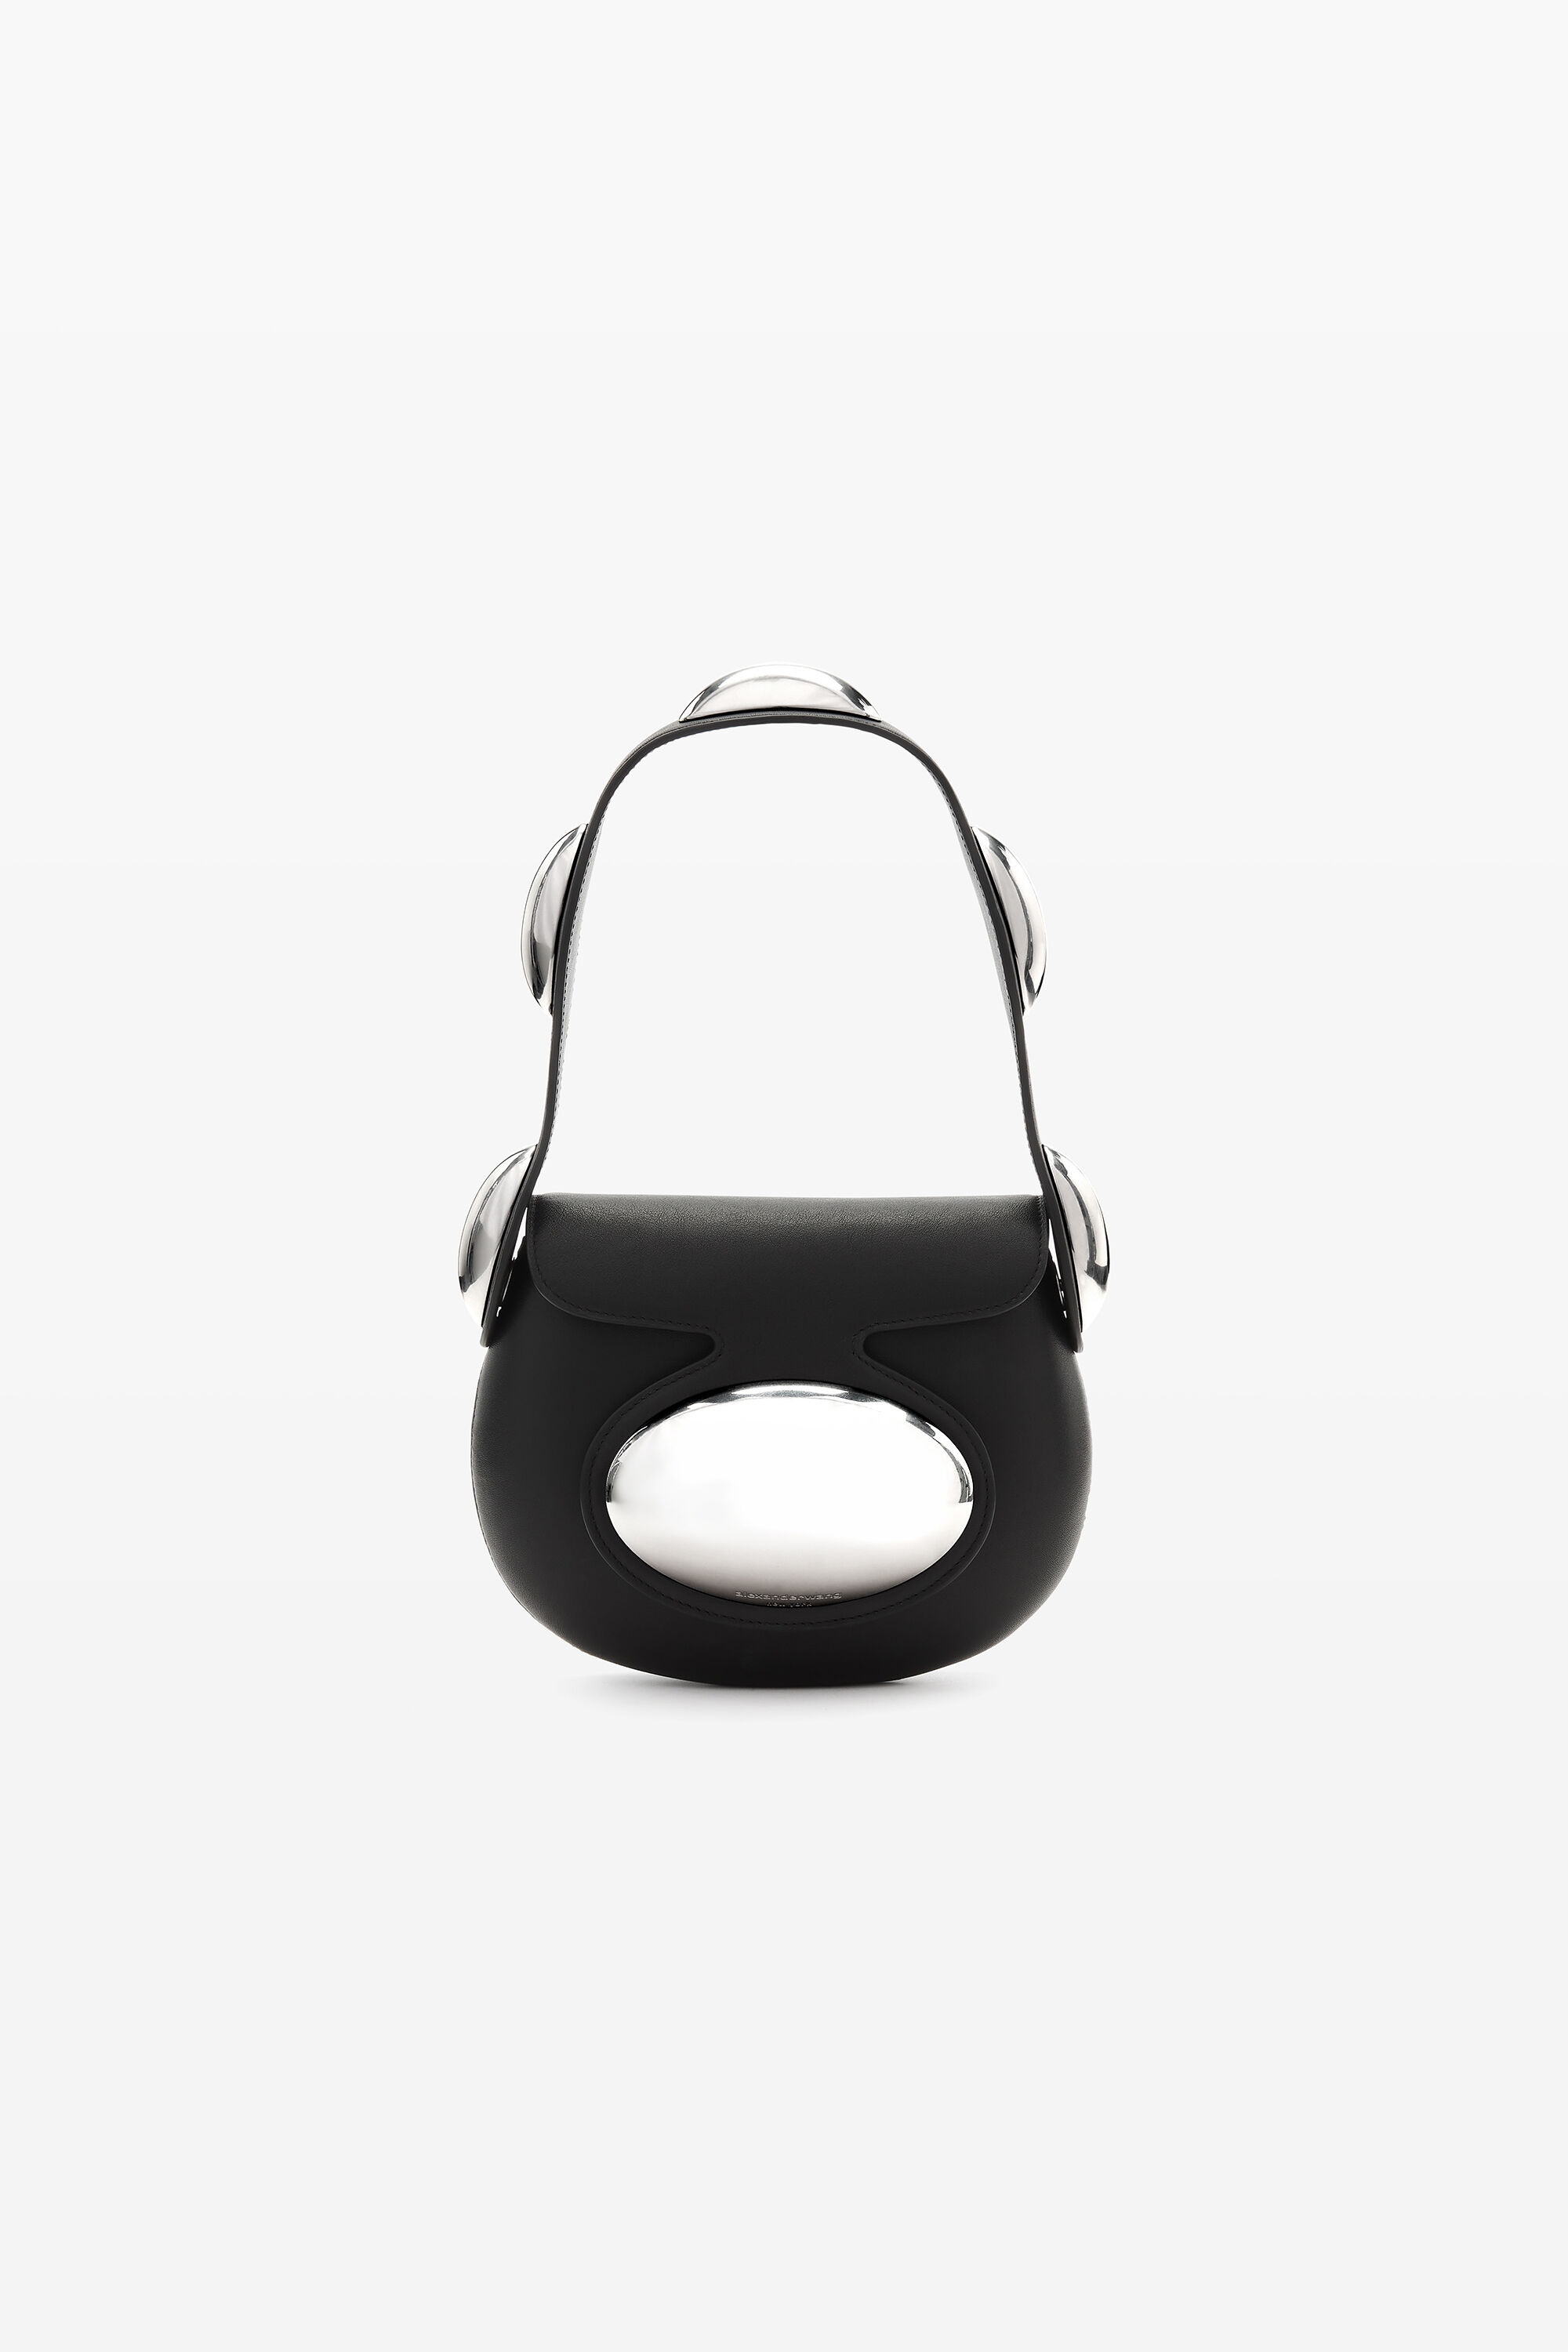 DOME SMALL SHOULDER BAG IN SMOOTH COW LEATHER in 